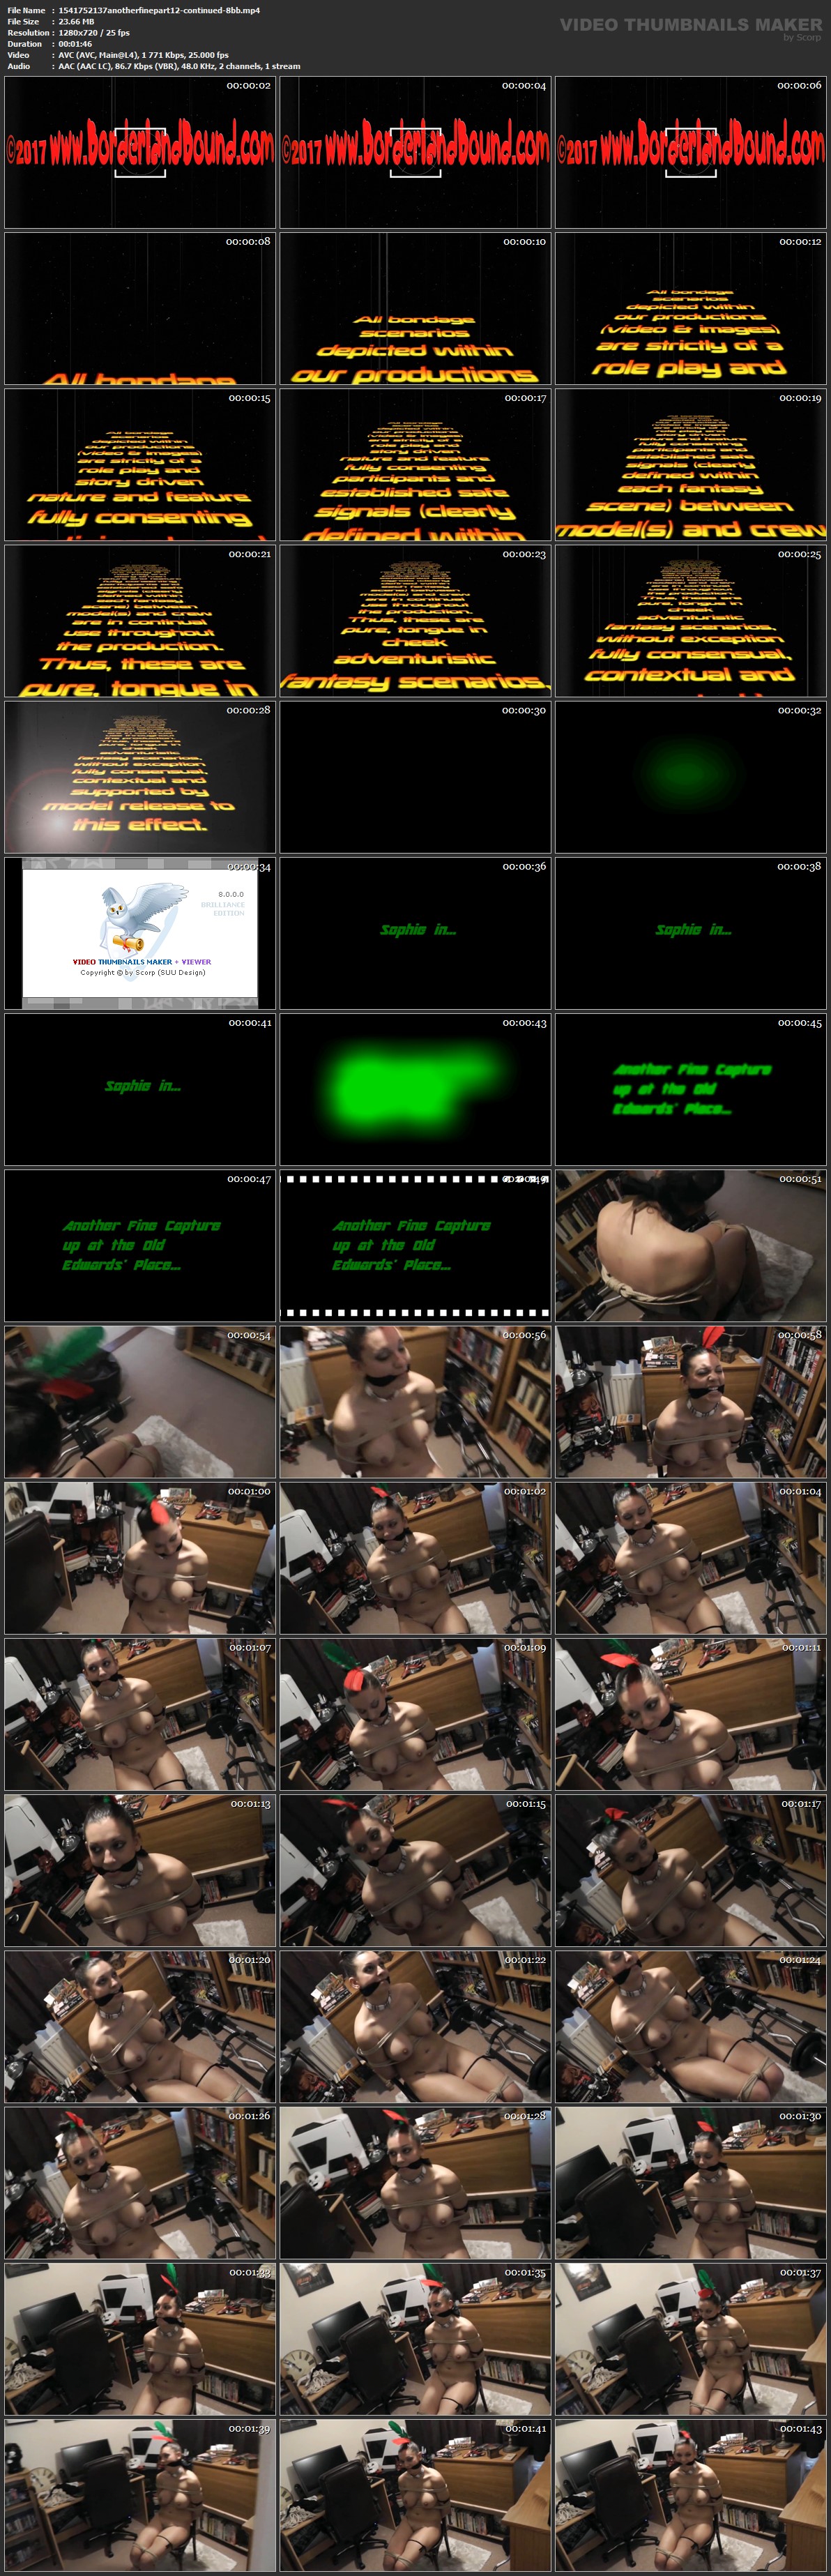 1541752137 anotherfinepart 12 continued 8 bb mp 4